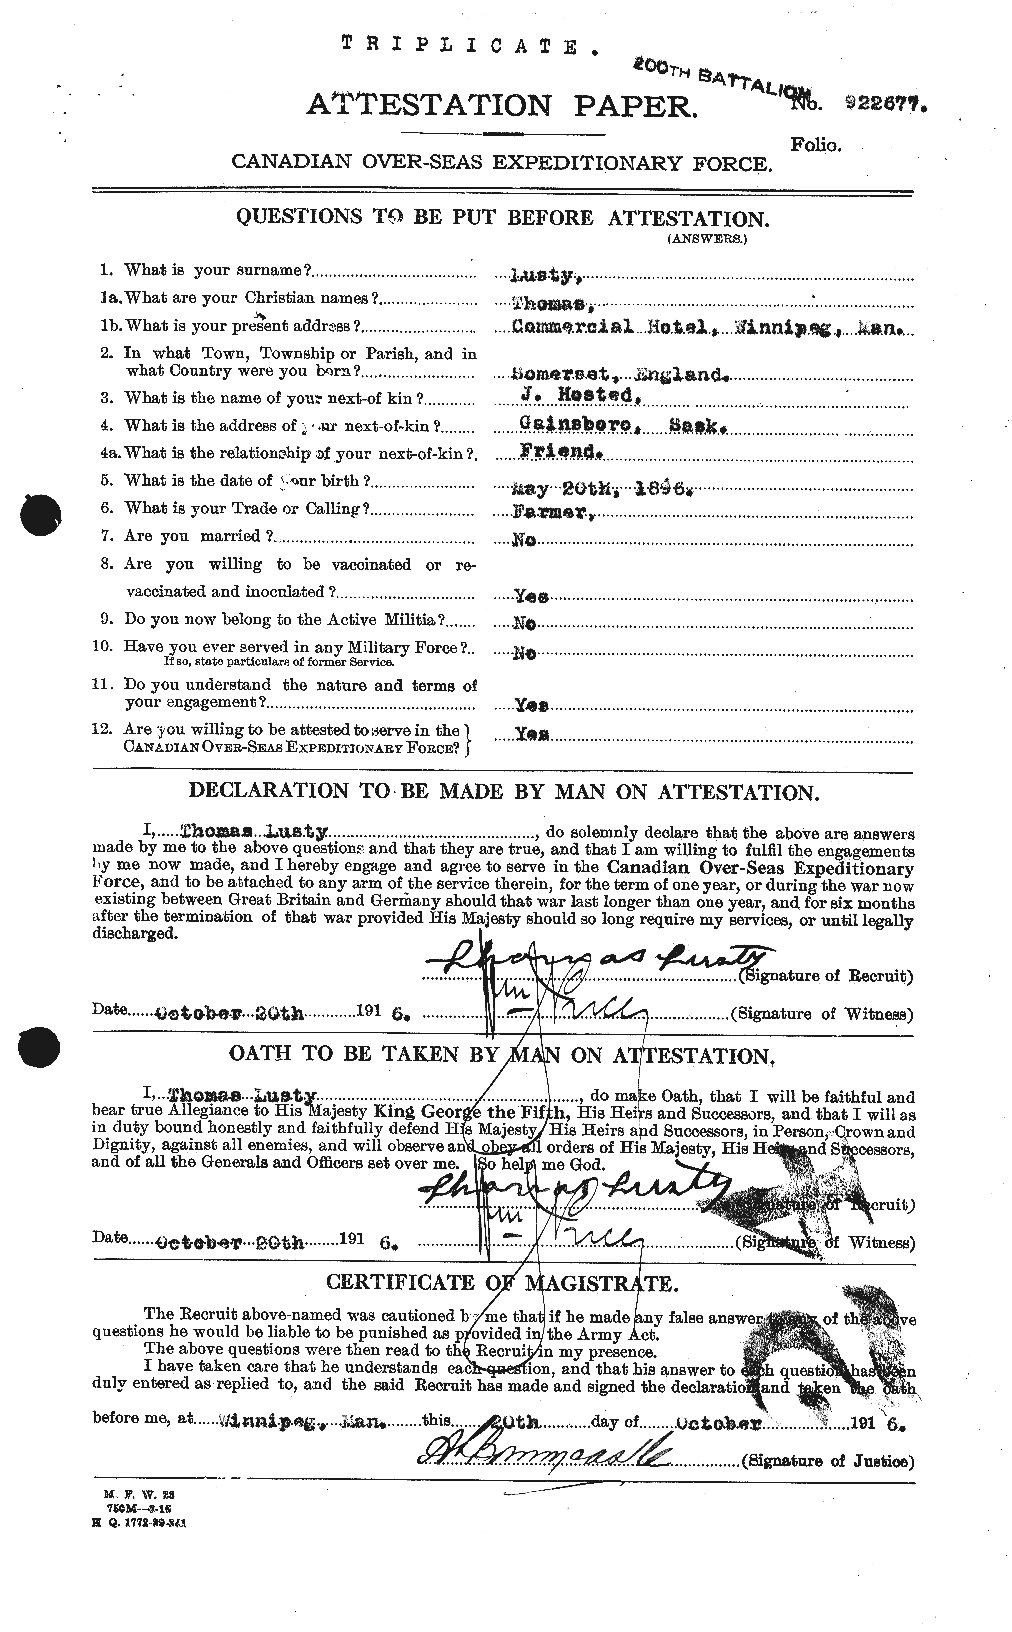 Personnel Records of the First World War - CEF 475908a